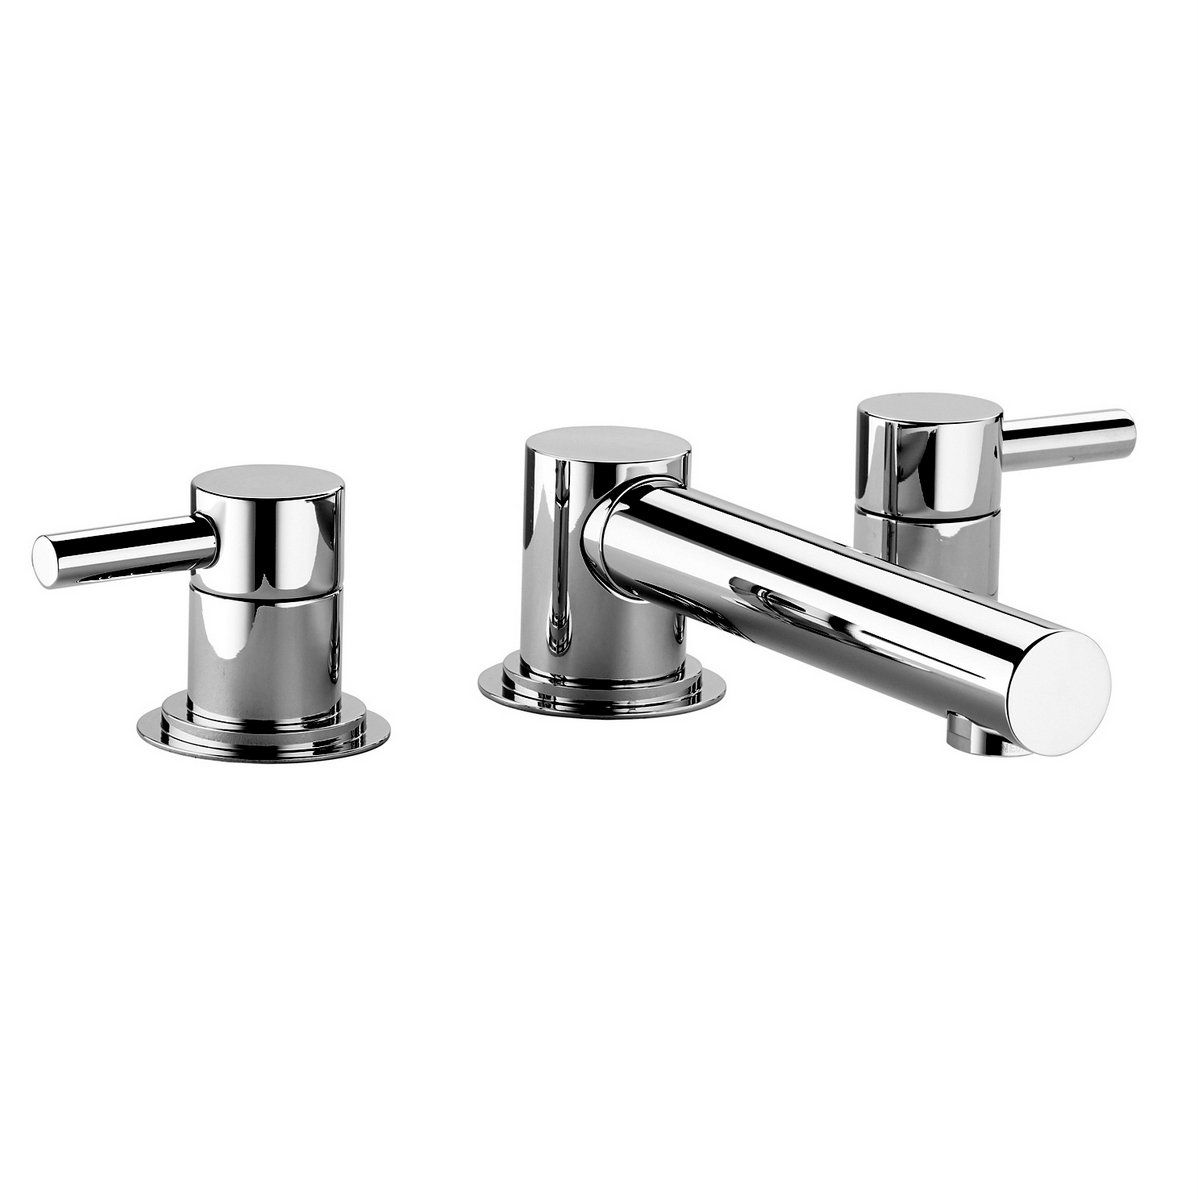 Swadling Absolute 3 Hole Deck Mounted Bath Mixer